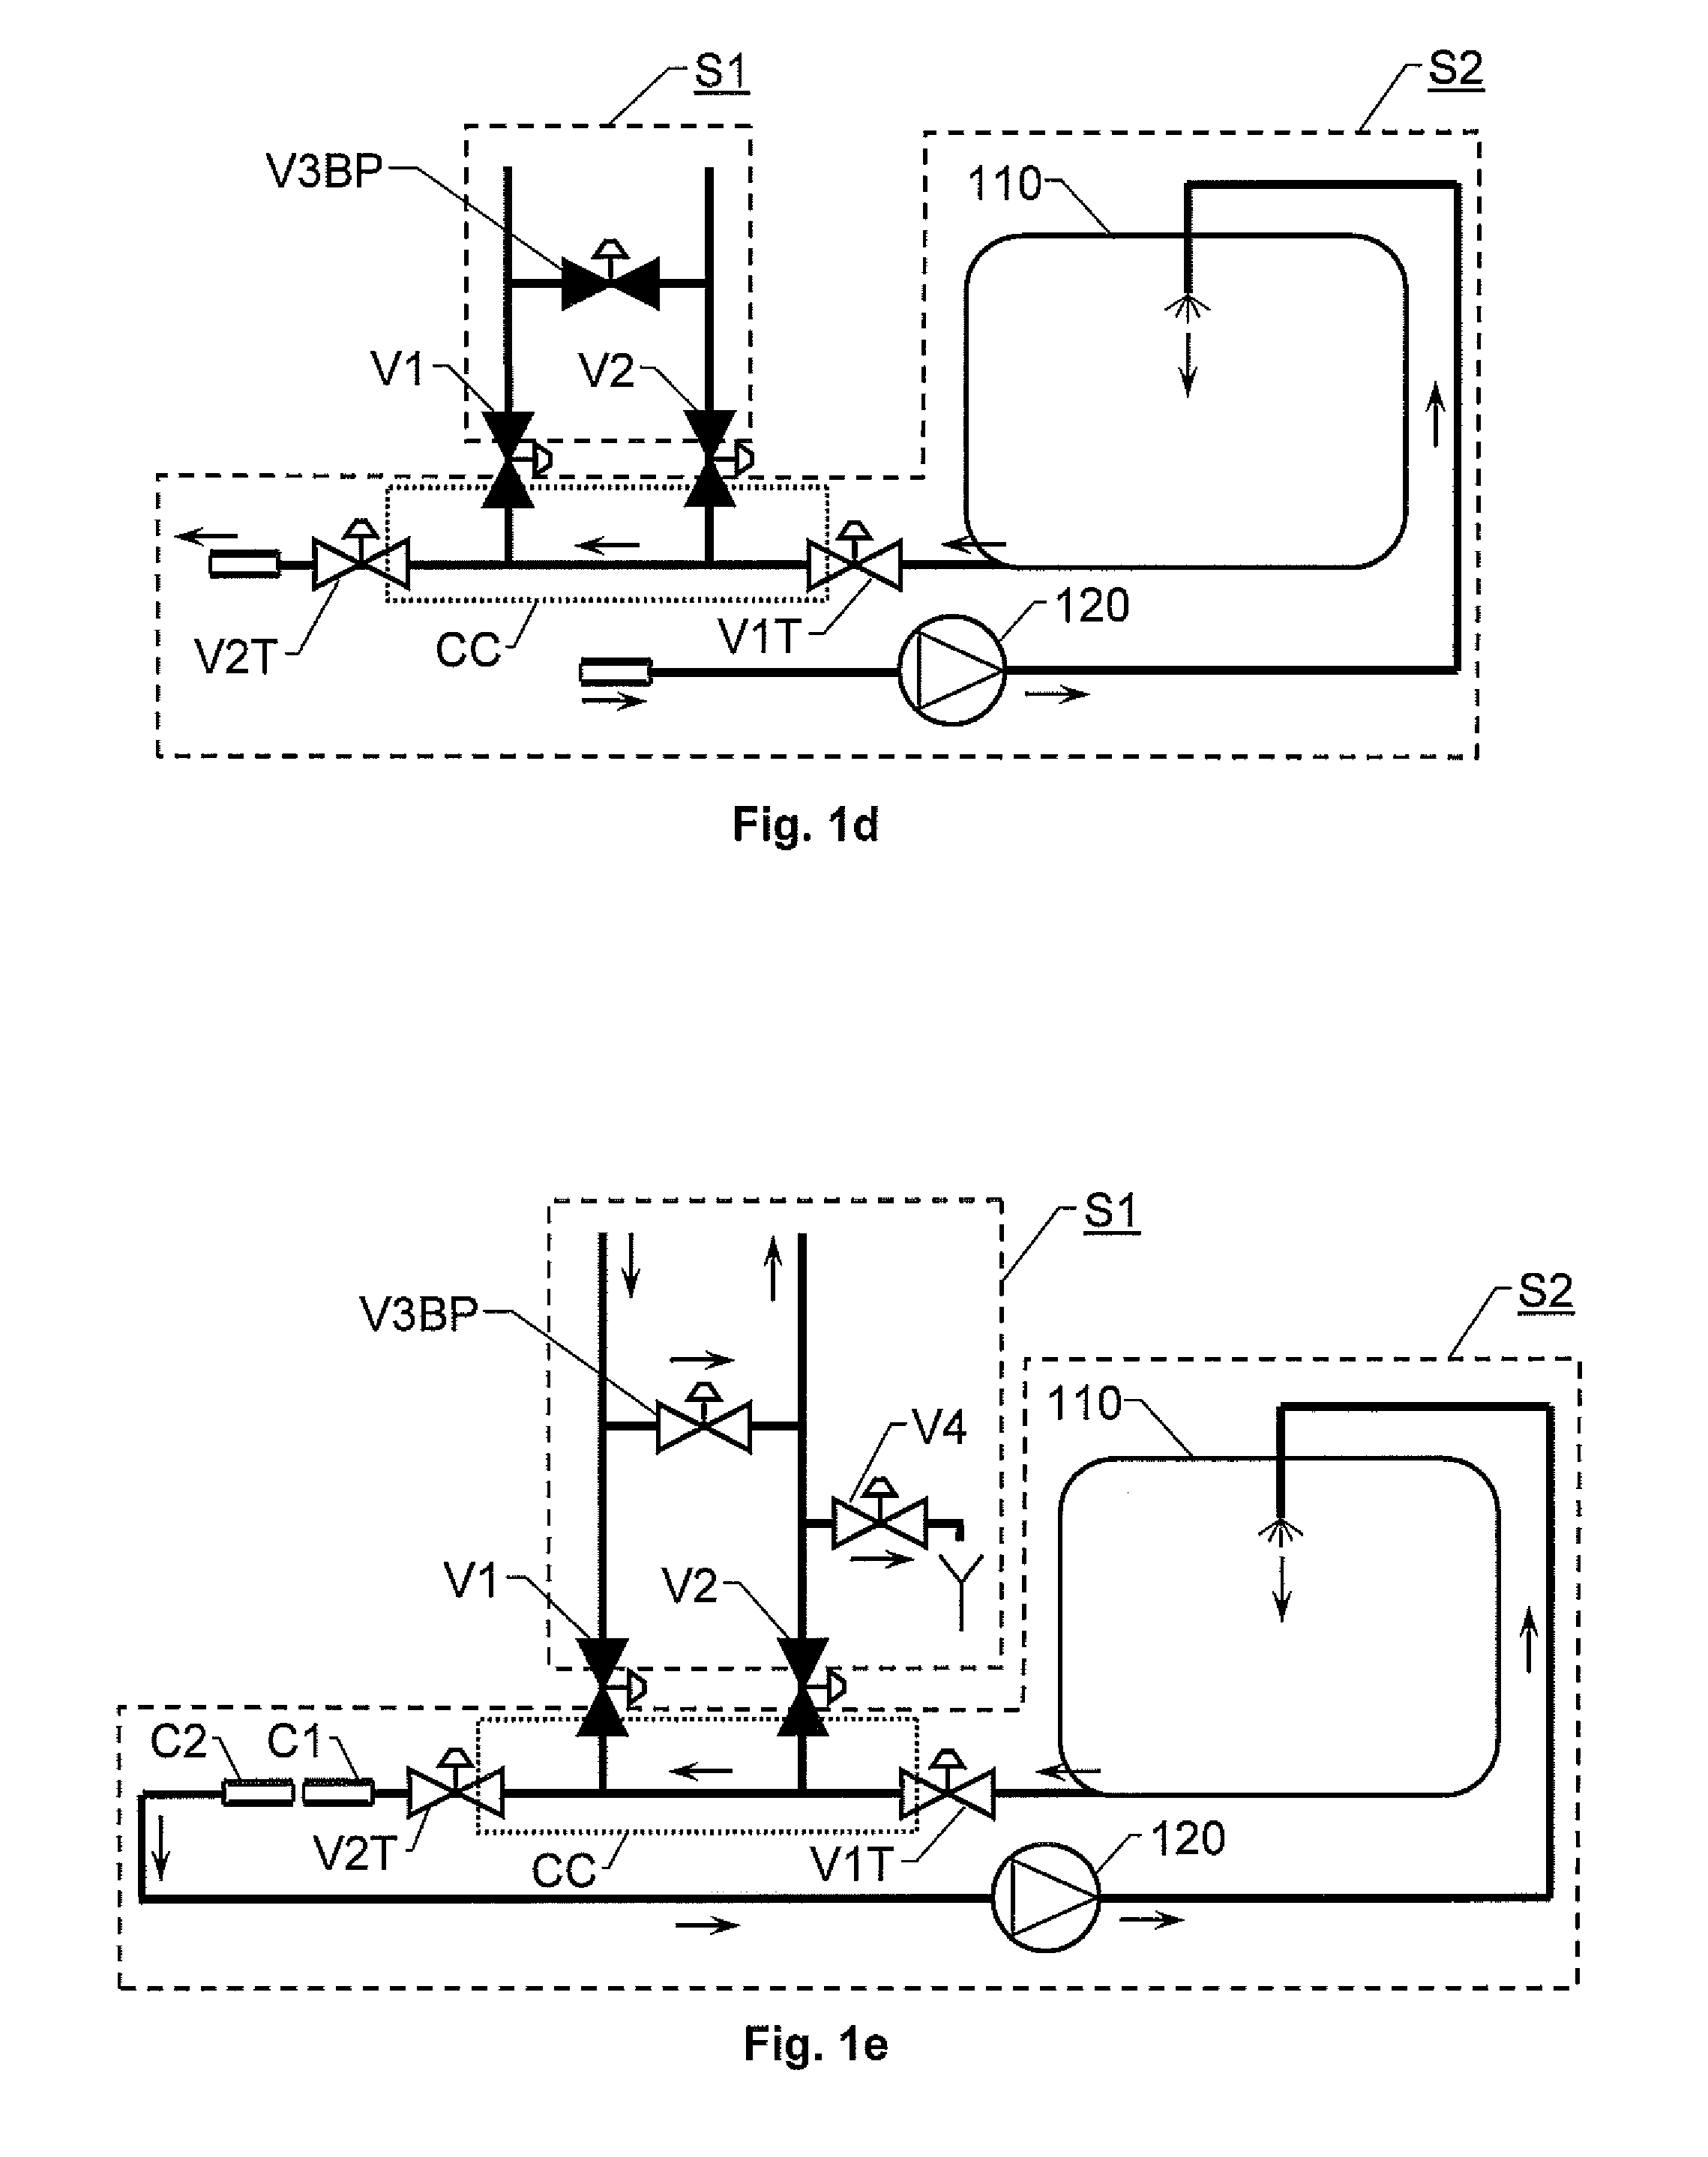 Independent cleaning of interfaces between separable fluid systems